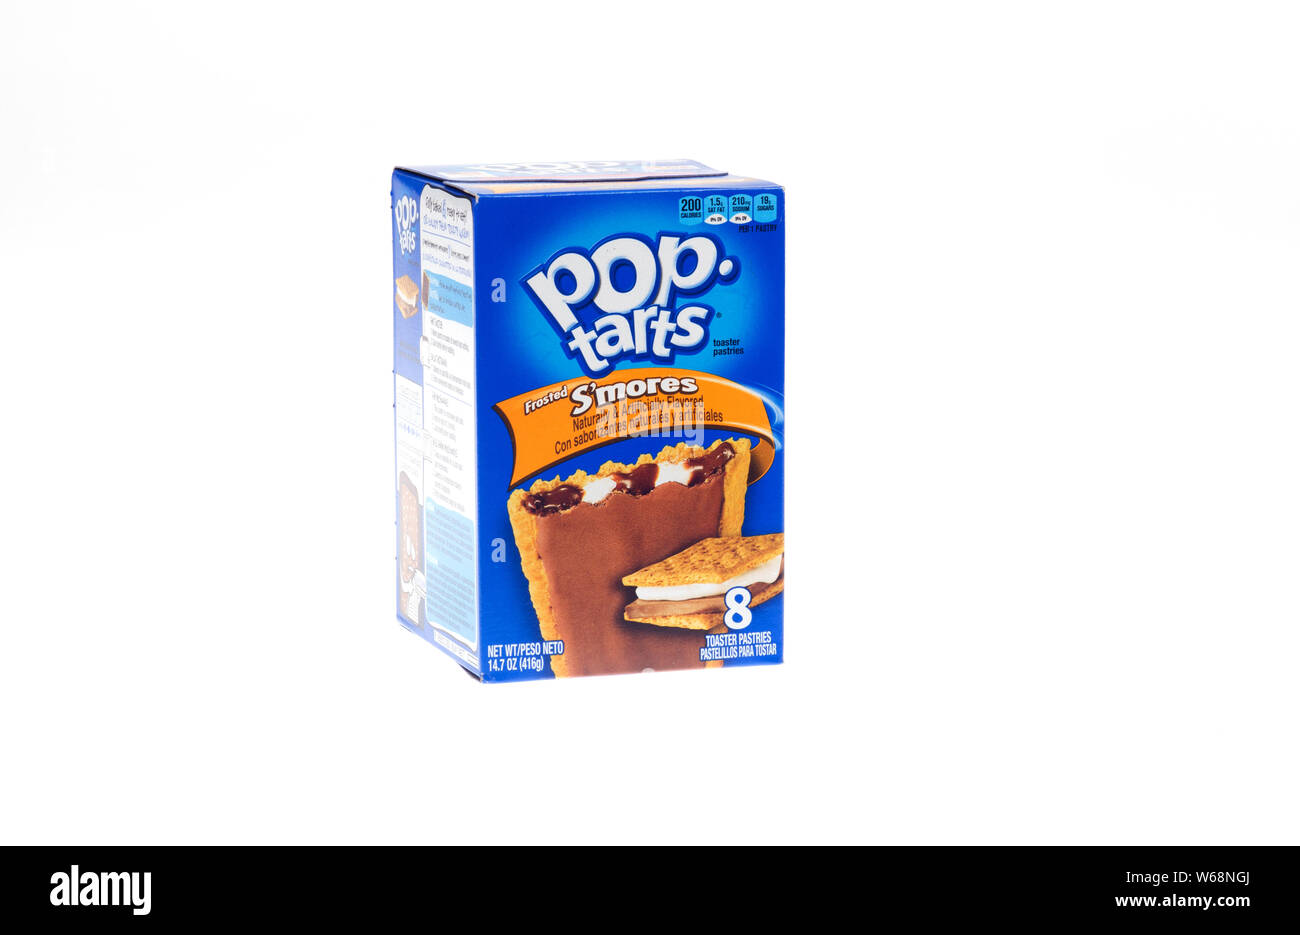 Kellogg's Pop-Tarts frosted S'mores toaster pastries box Stock Photo - Alamy